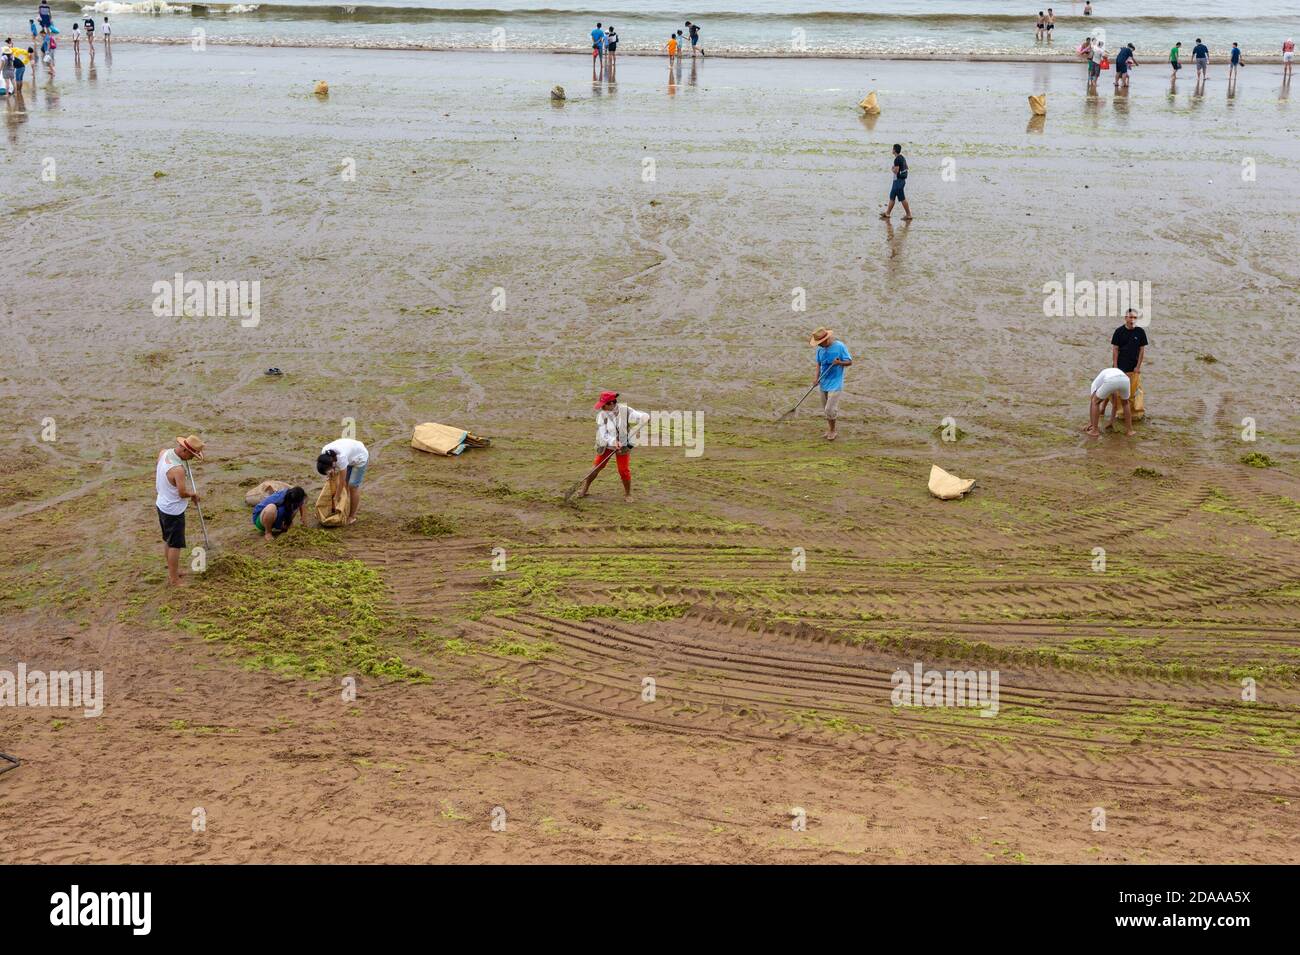 Qingdao / China - August 5, 2015: Workers cleaning sea lettuce algal bloom (Enteromorpha) at Qingdao city beach. Sea lettuce is a common pollutant at Stock Photo